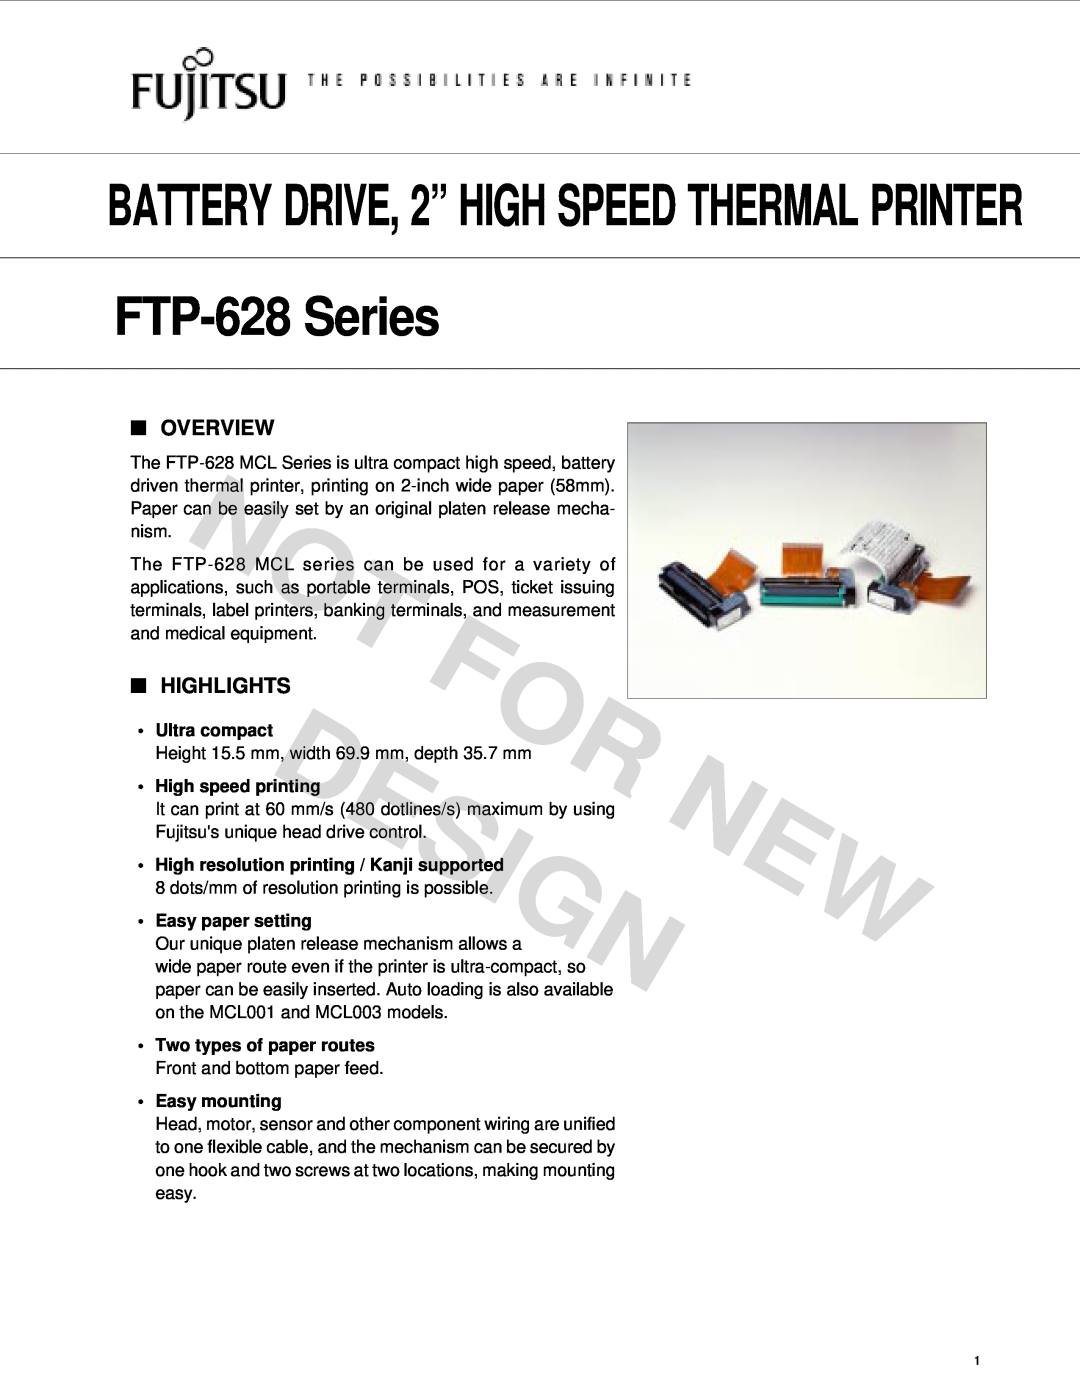 Fujitsu FTP-628 Series manual Overview, Highlights, Ultra compact, High speed printing, Easy paper setting, Easy mounting 